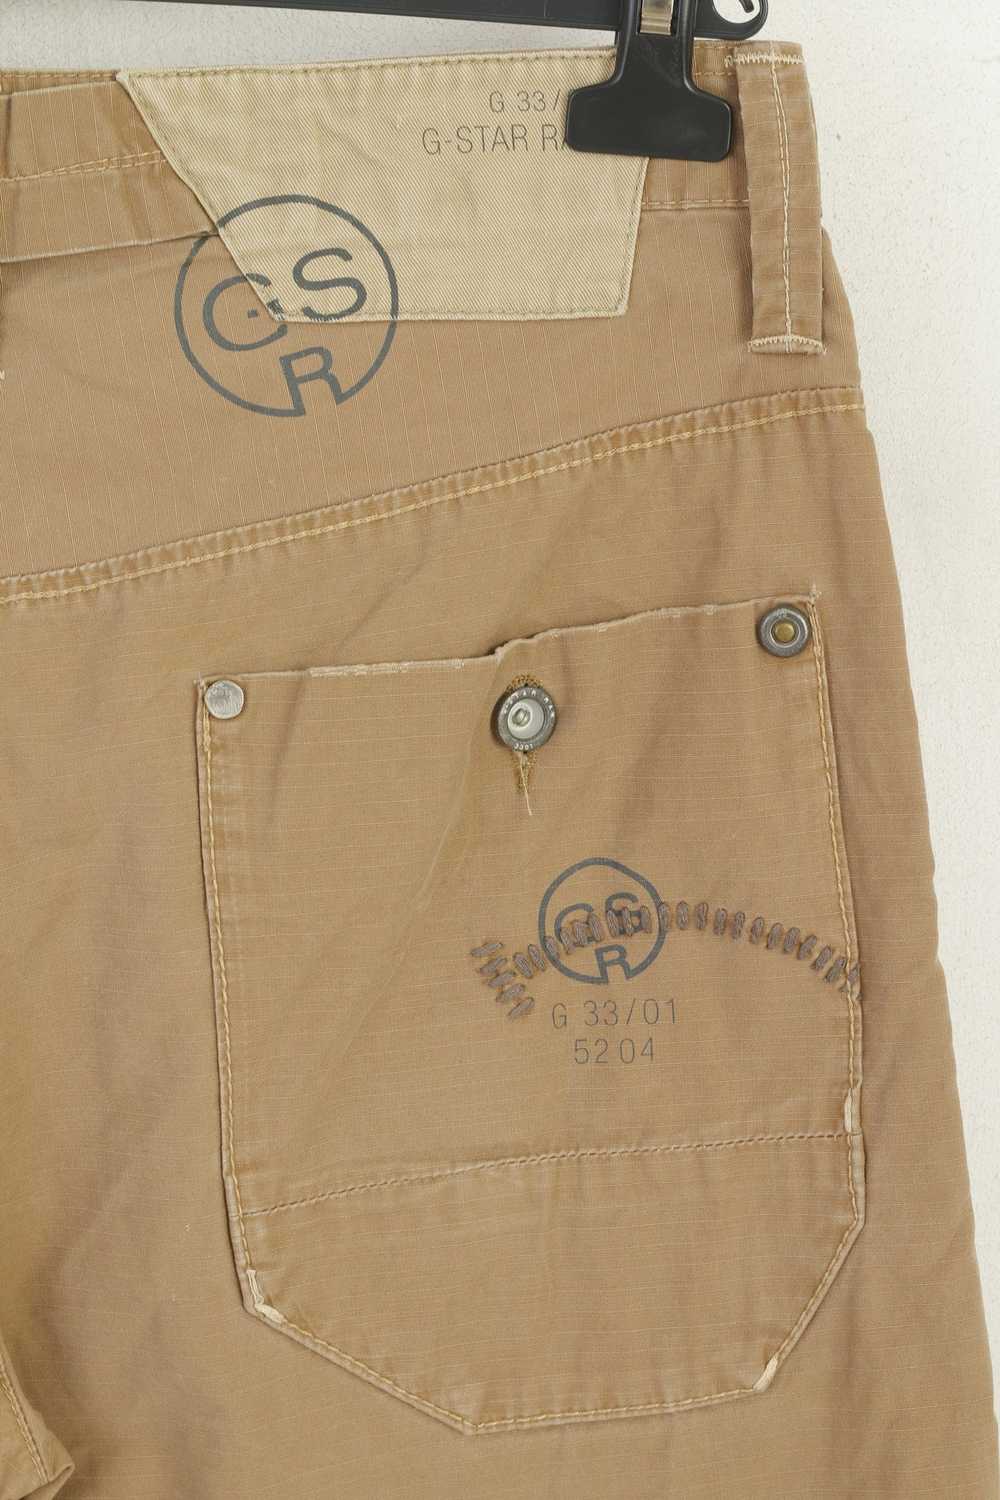 G Star Raw G-Star Raw Men 31 Trousers Brown Cotto… - image 5